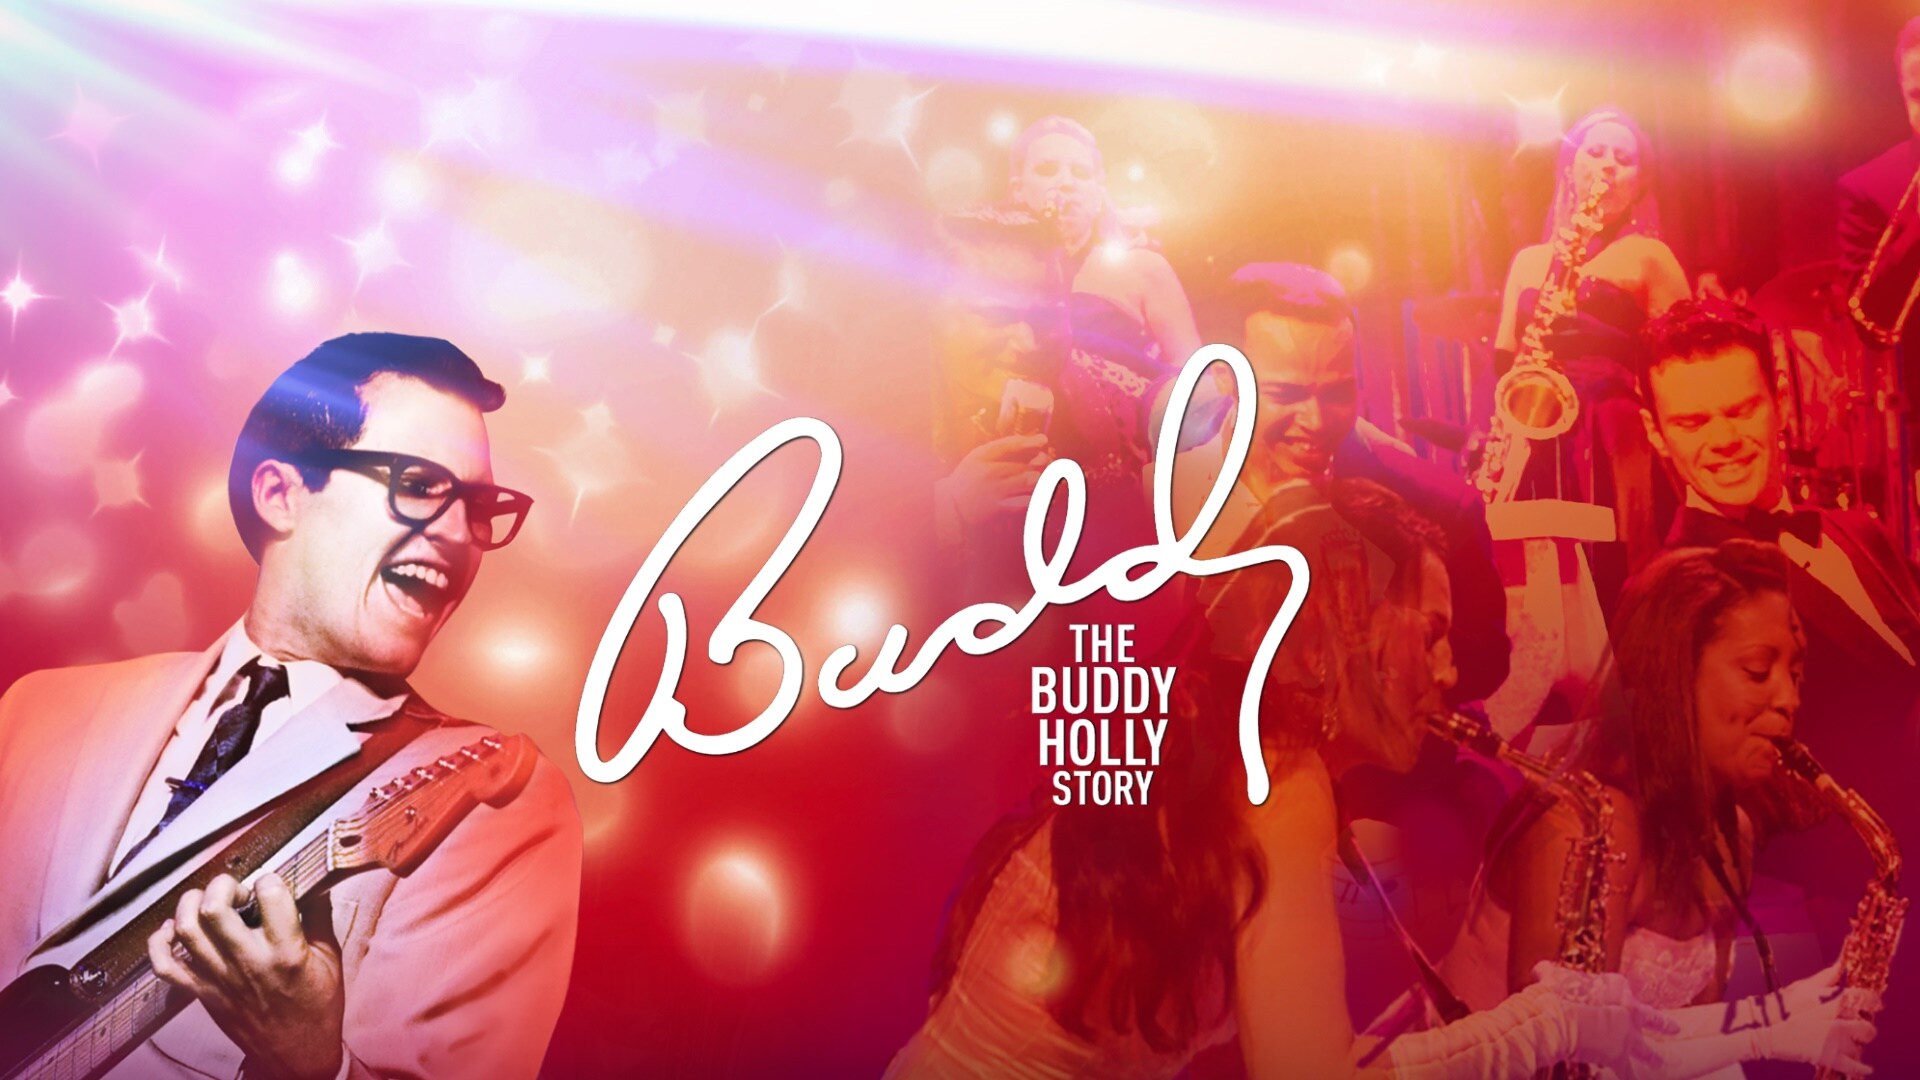 40-facts-about-the-movie-the-buddy-holly-story